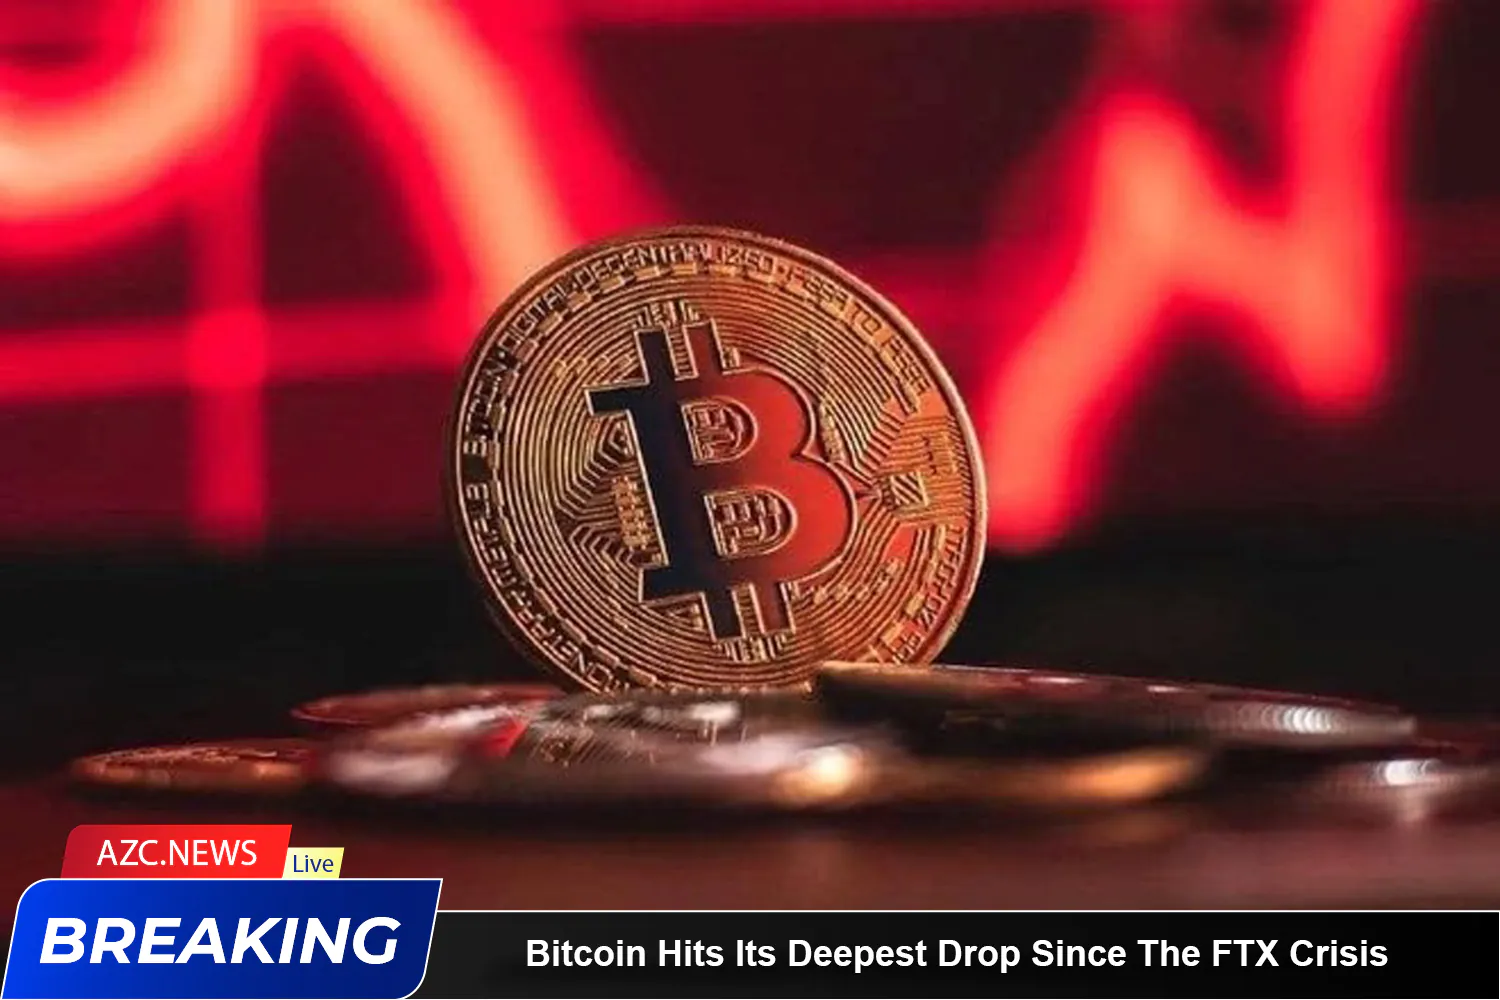 Bitcoin Hits Its Deepest Drop Since The Ftx Crisis